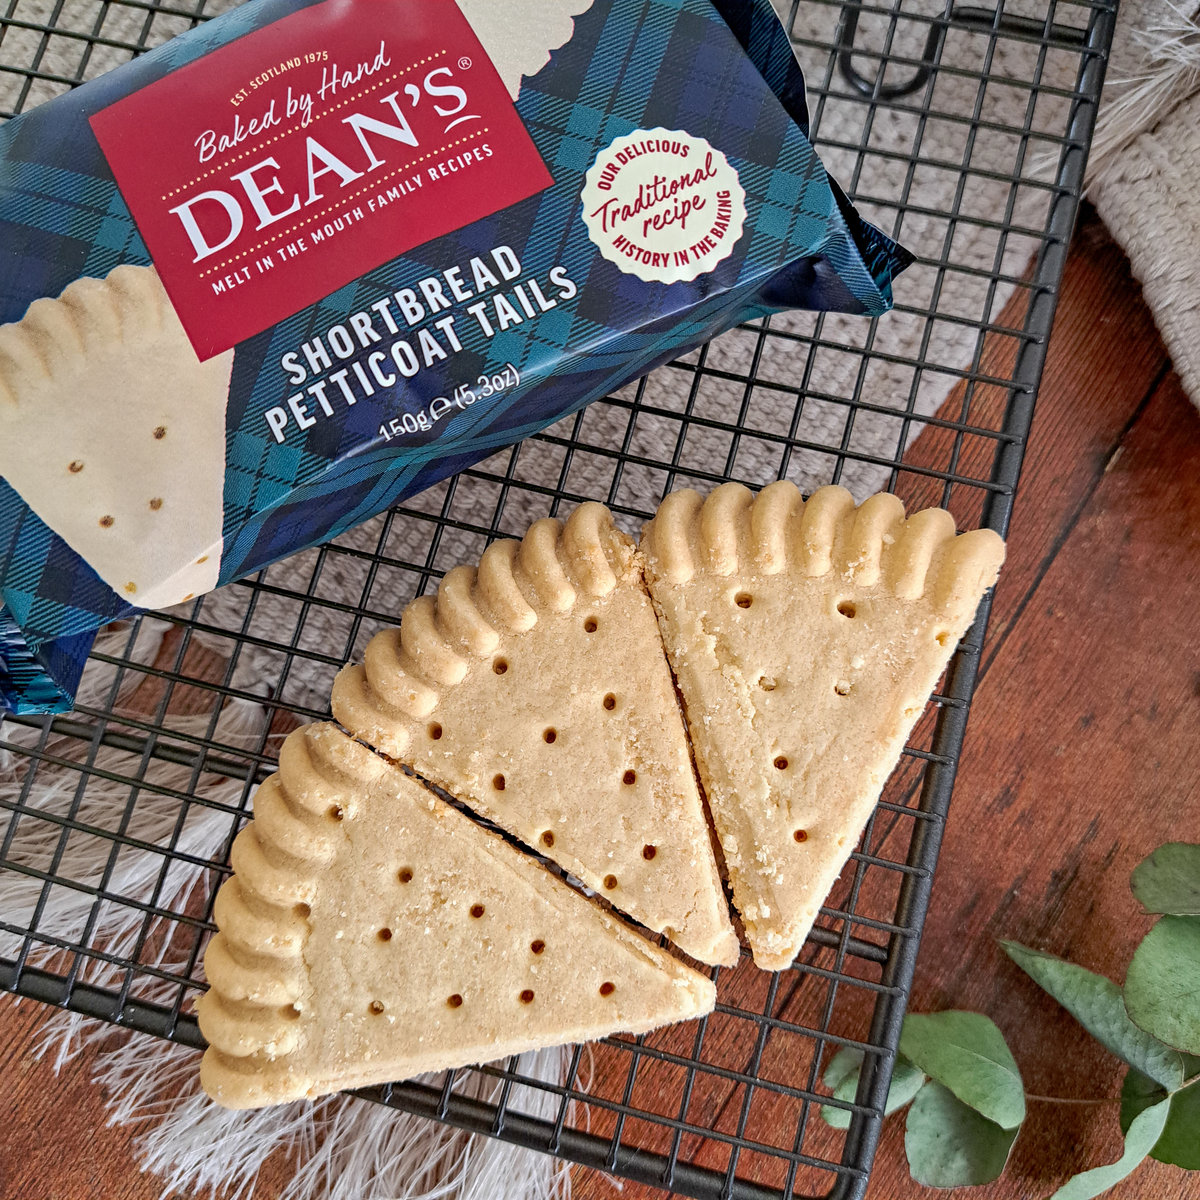 Buy the Shortbread Petticoat Tails 150g online at Dean's